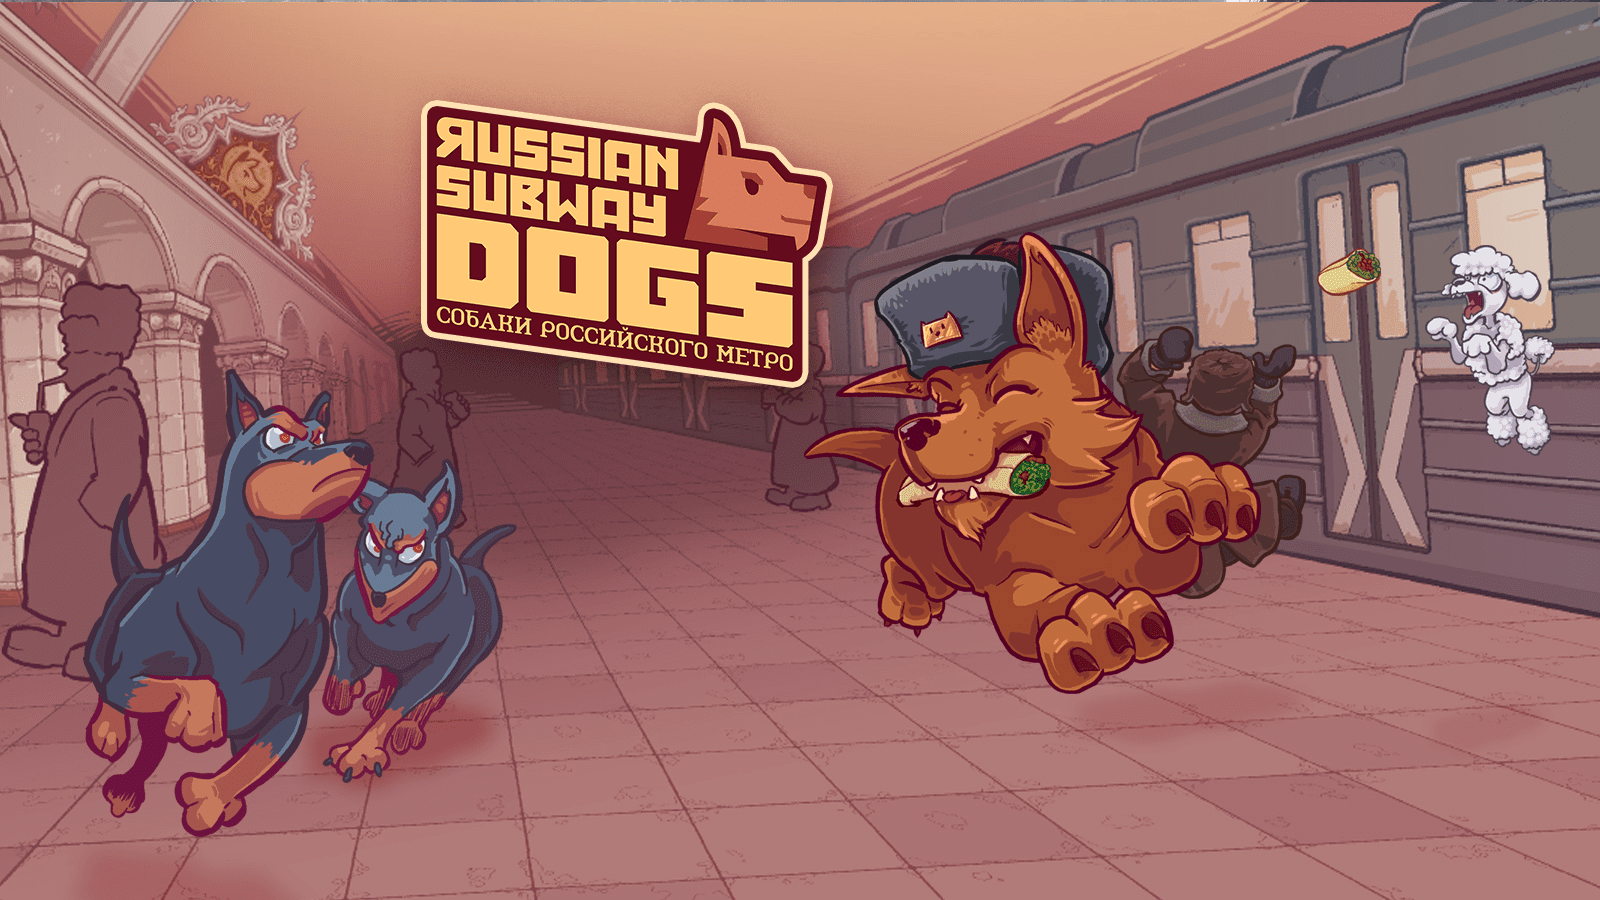 Grab your ticket: Russian Subway Dogs launches on August 2nd for PC